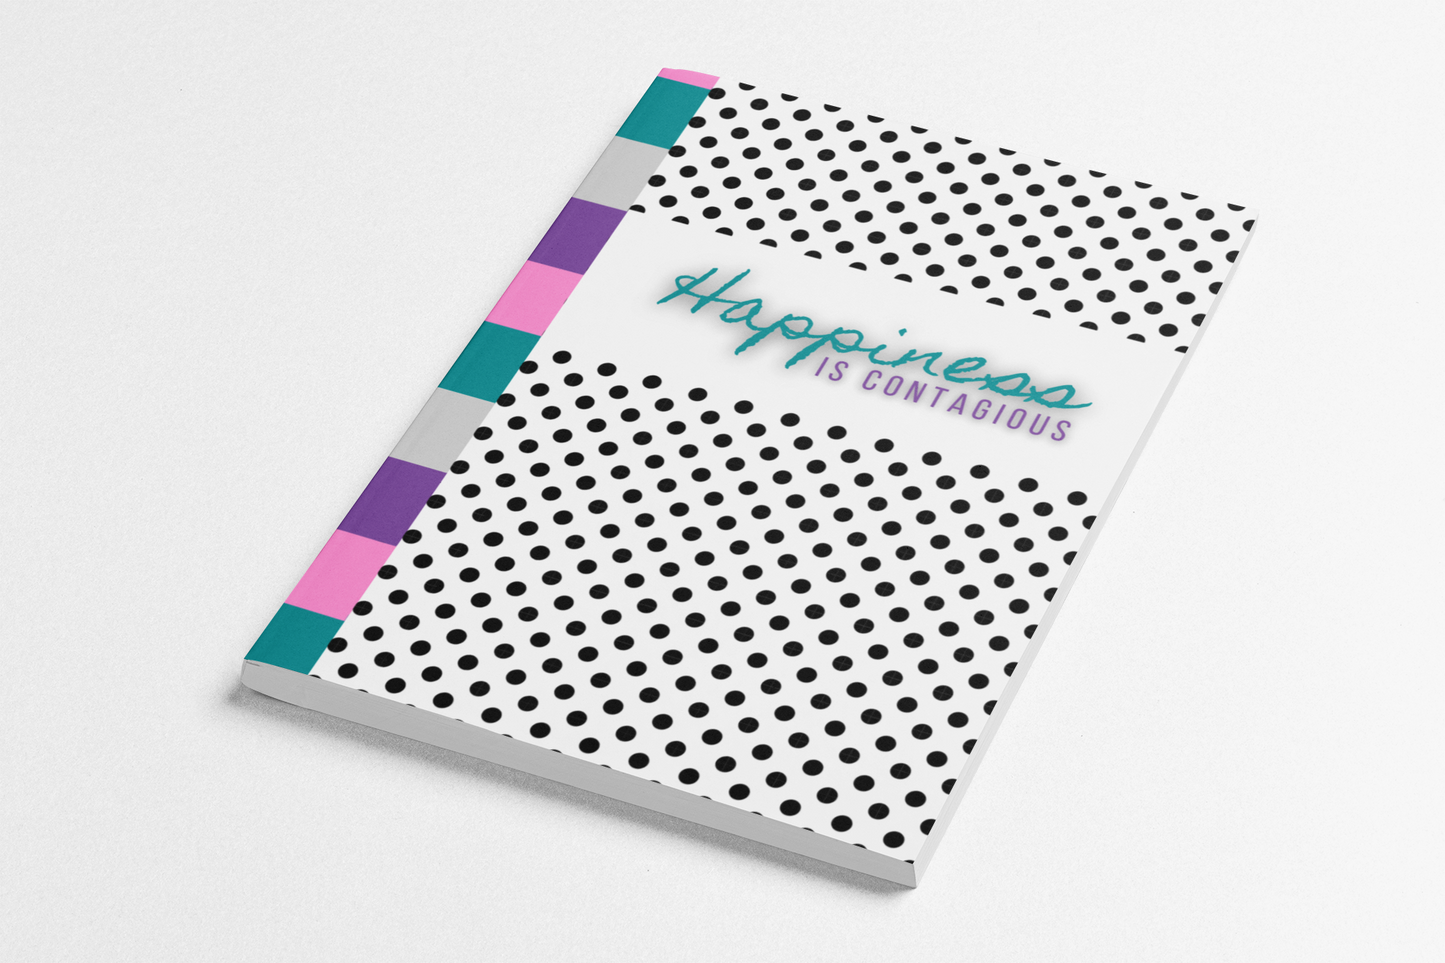 Happiness is Contagious Guided Gratitude Journal and Notepad Set